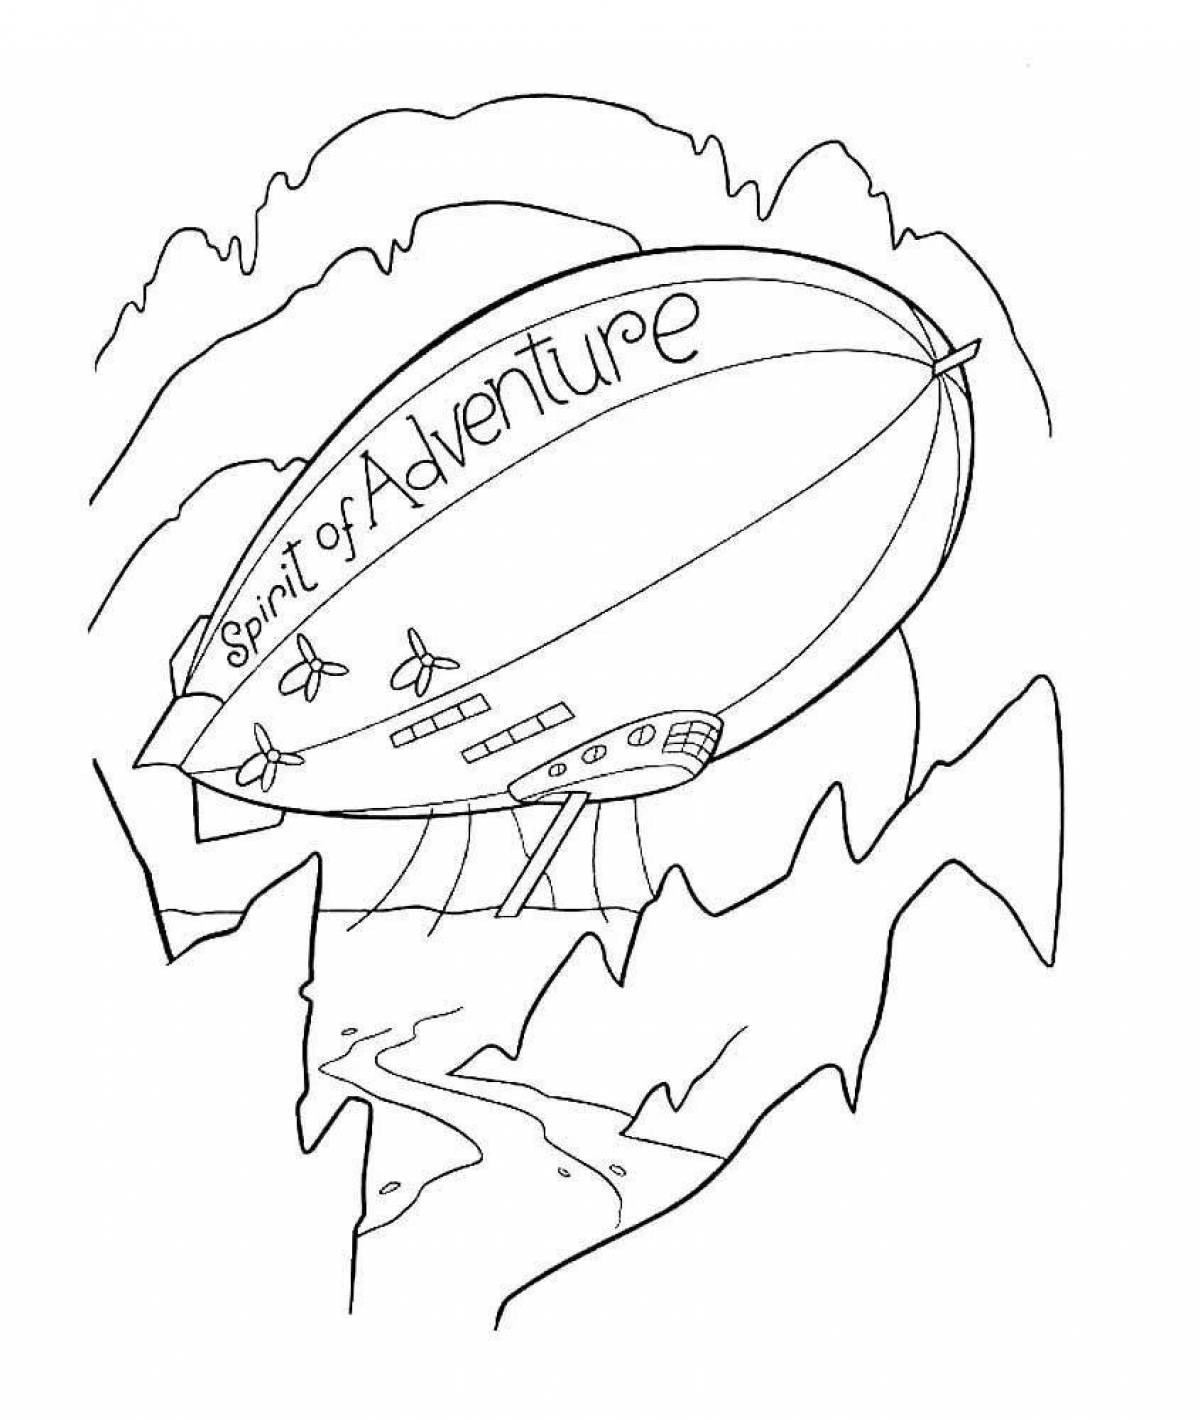 Glitter airship coloring book for kids